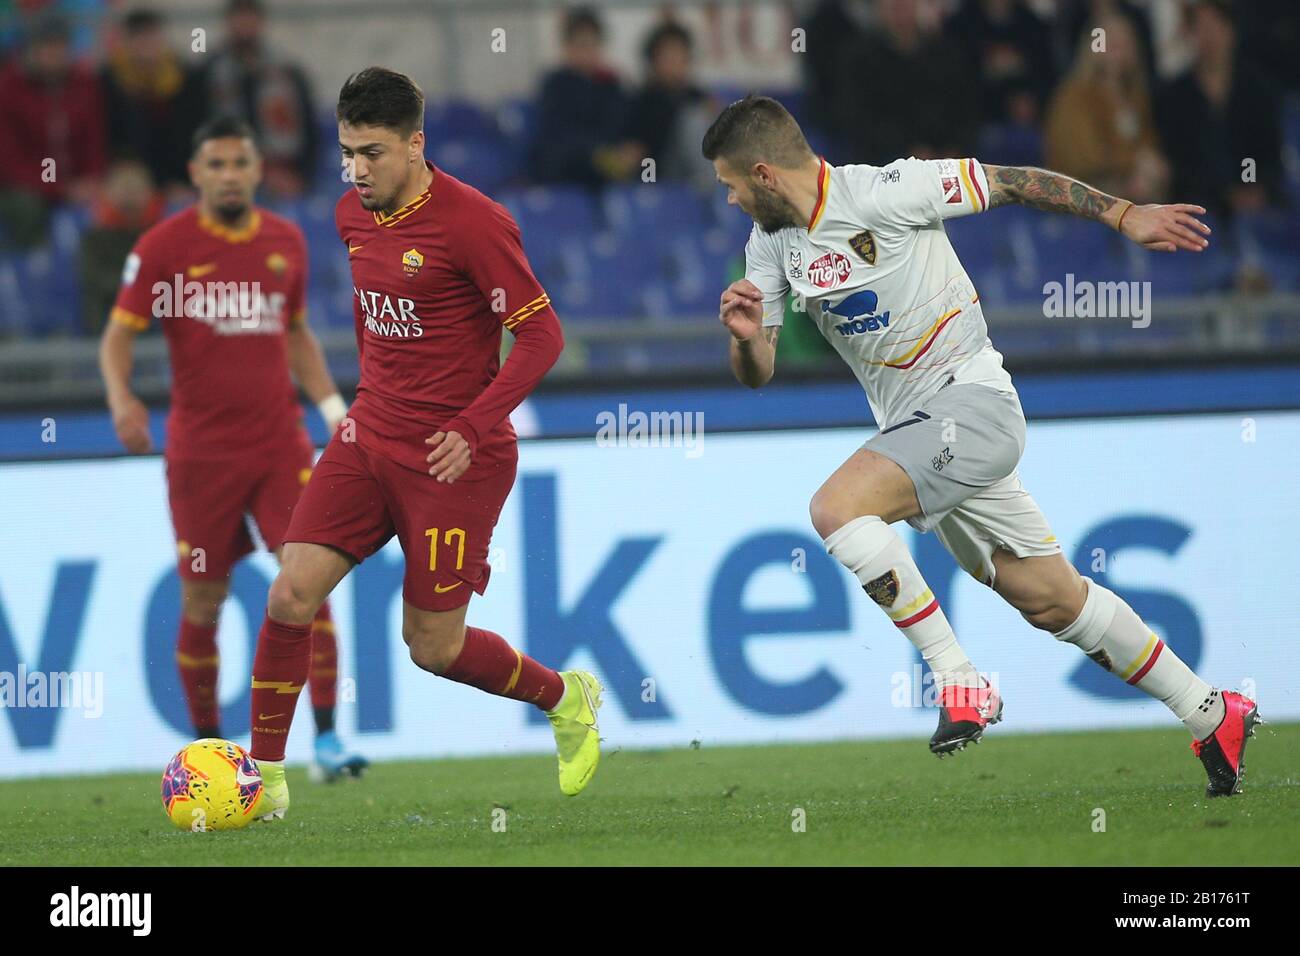 Rome, Italy. 23rd Feb, 2020. Rome, Italy - 23.02.2020: Cengiz Under (AS  ROMA), M.Calderoni (Lecce) in action during the Italian Serie A soccer  match 25 between As Roma vs Lecce, at Olympic